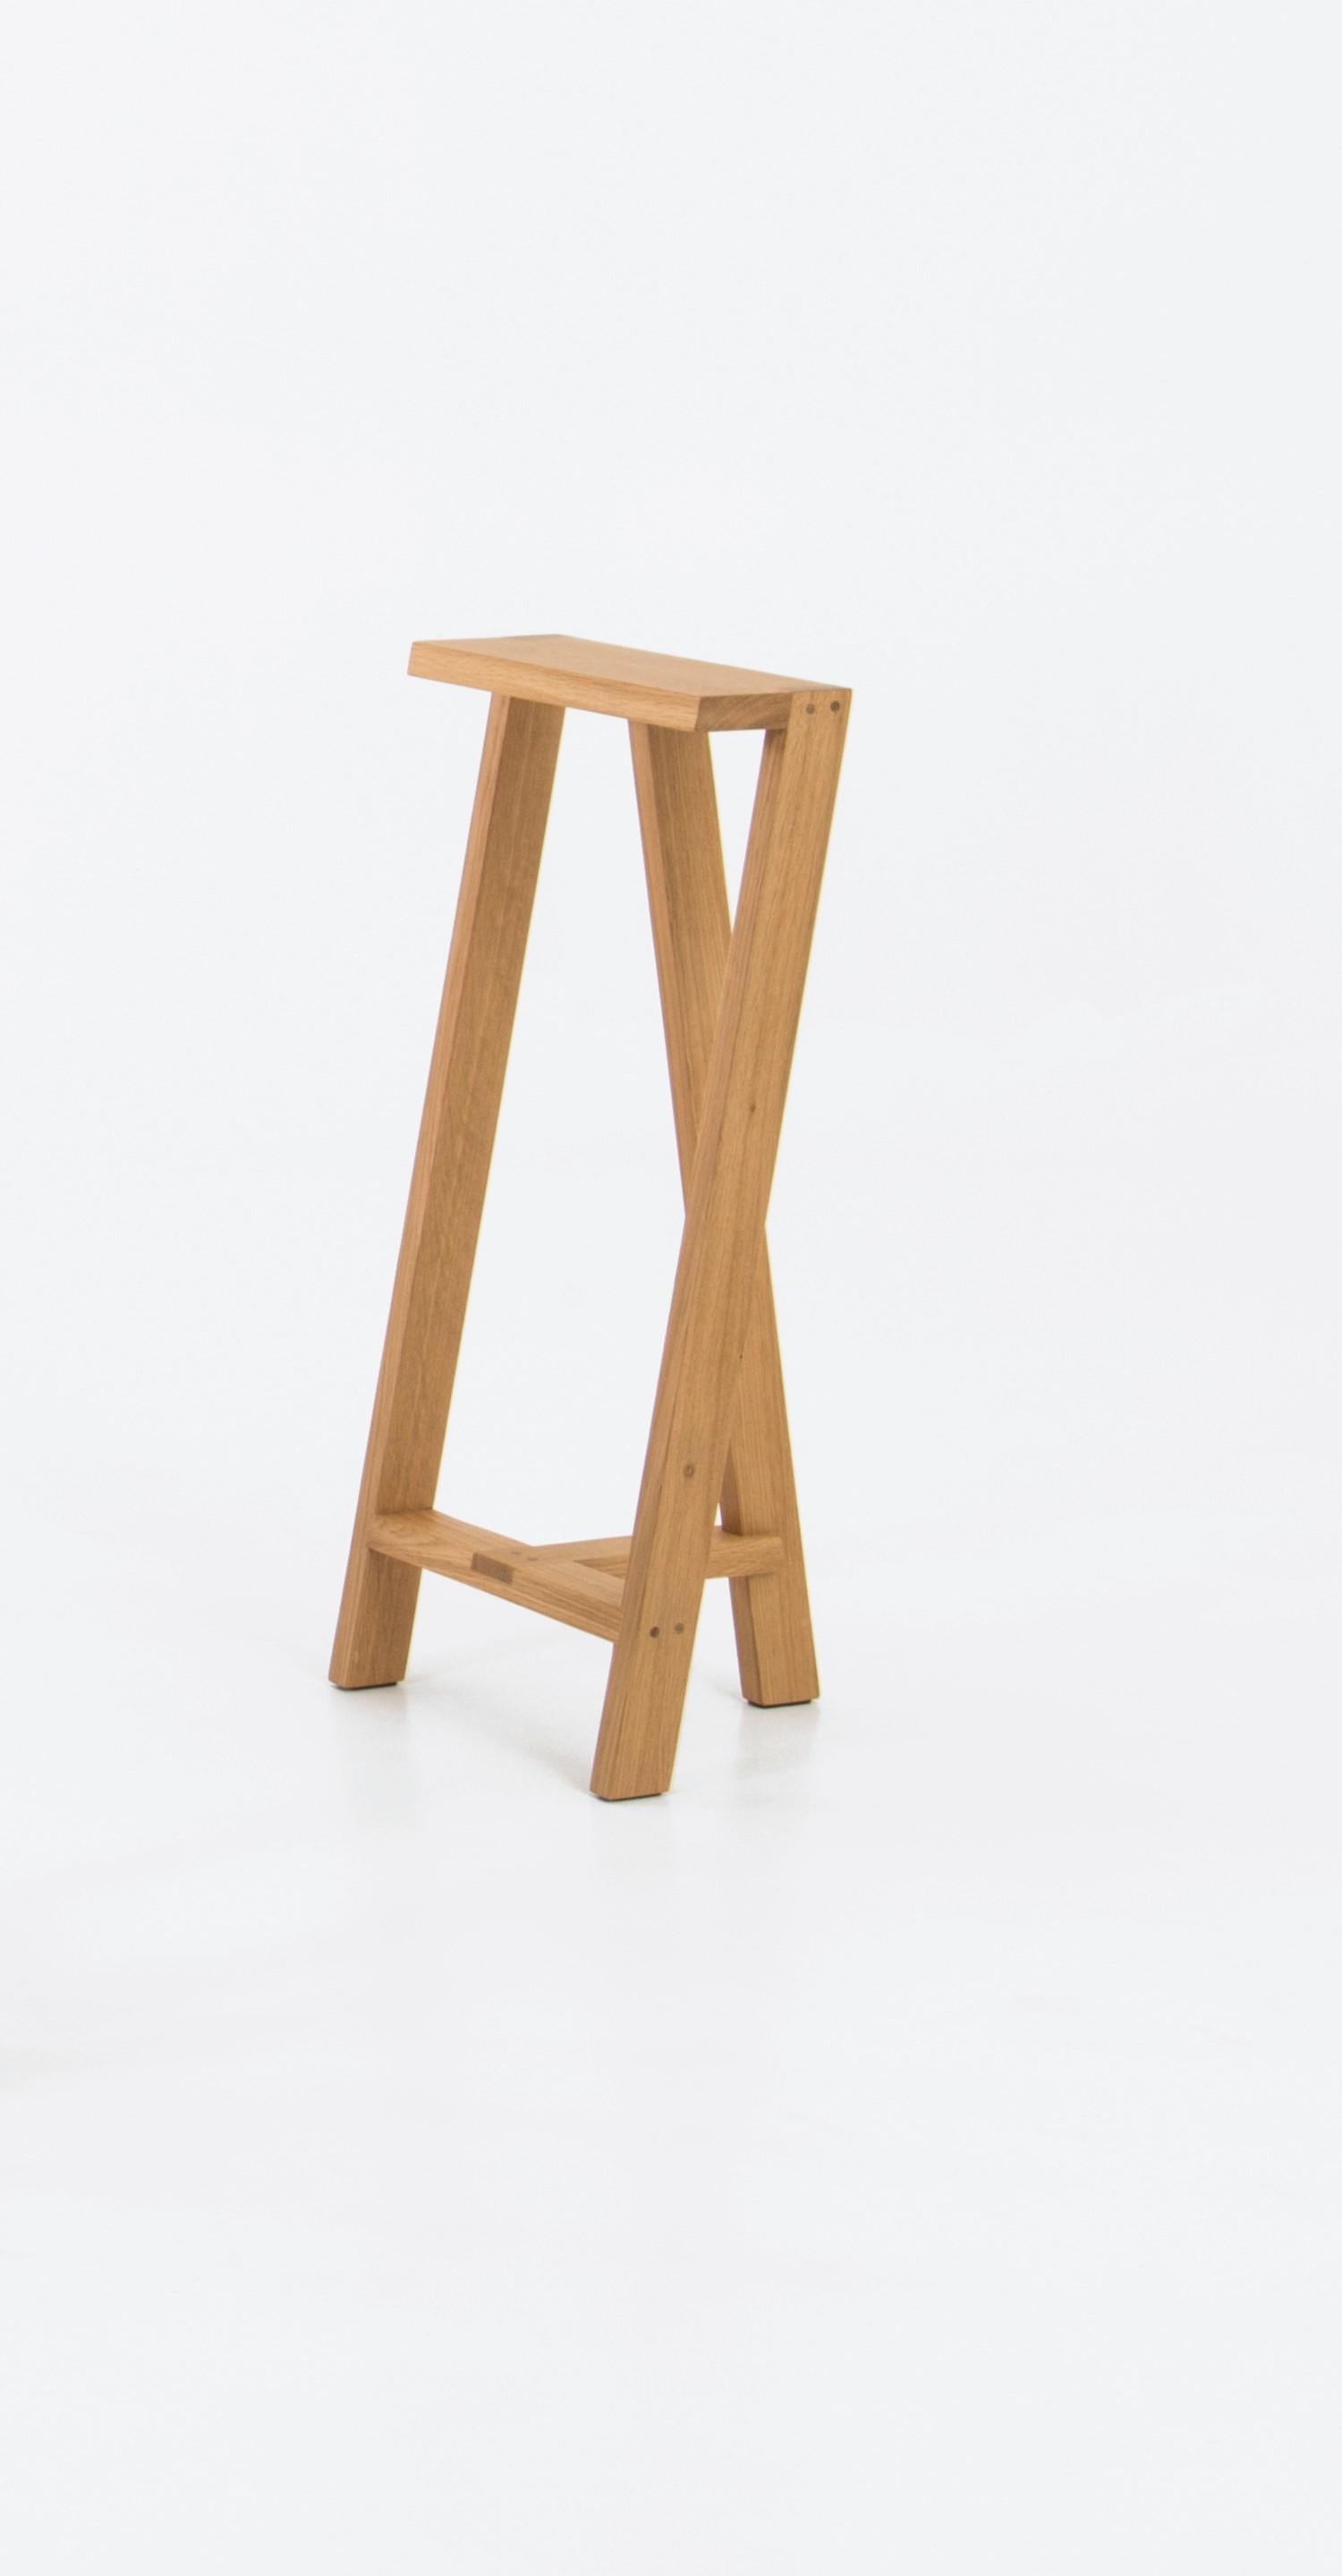 Set of 4 large Pausa oak stool by Pierre-Emmanuel Vandeputte
Dimensions: D 32 x W 35 x H 80 cm
Materials: oak wood
Available in burnt oak version and in 3 sizes

Pausa is a series of stools; 45cm, 65cm, or 80cm of assembled oak pieces. 
The